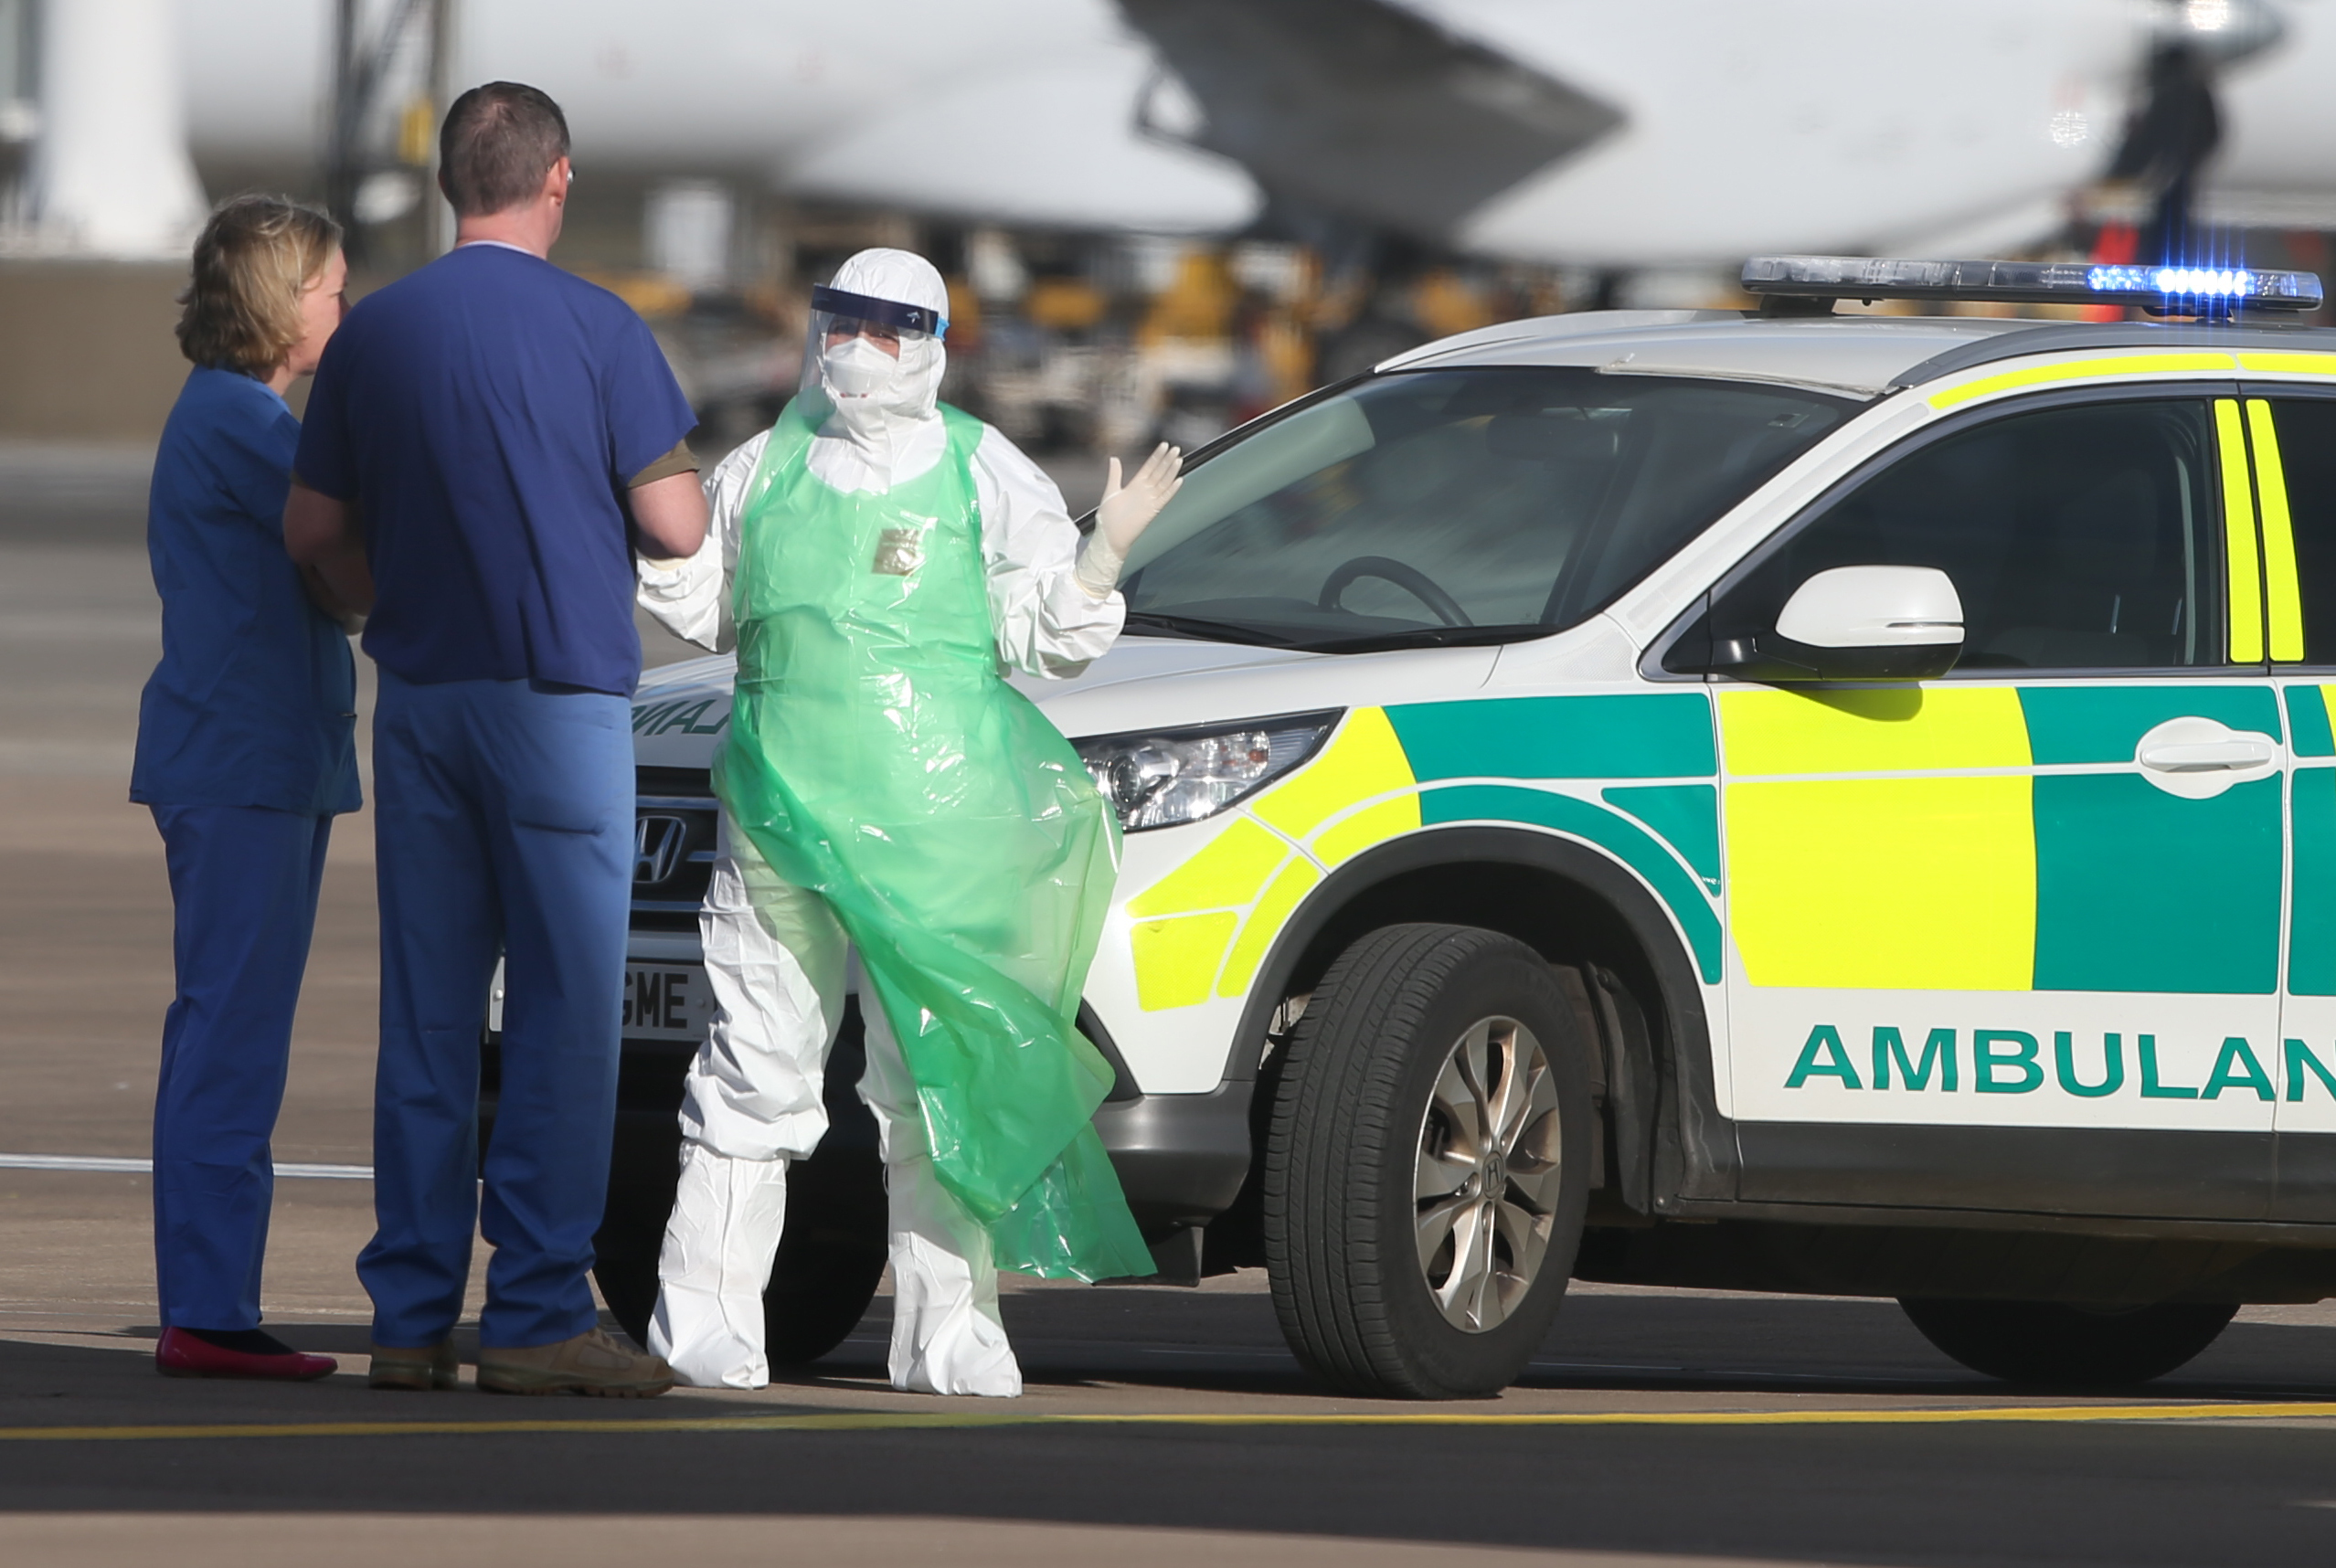 Medics after transfering nurse Pauline Cafferkey onto an RAF Hercules aircraft at Glasgow Airport before she is flown to London for treatment at the Royal Free Hospital after contracting Ebola.